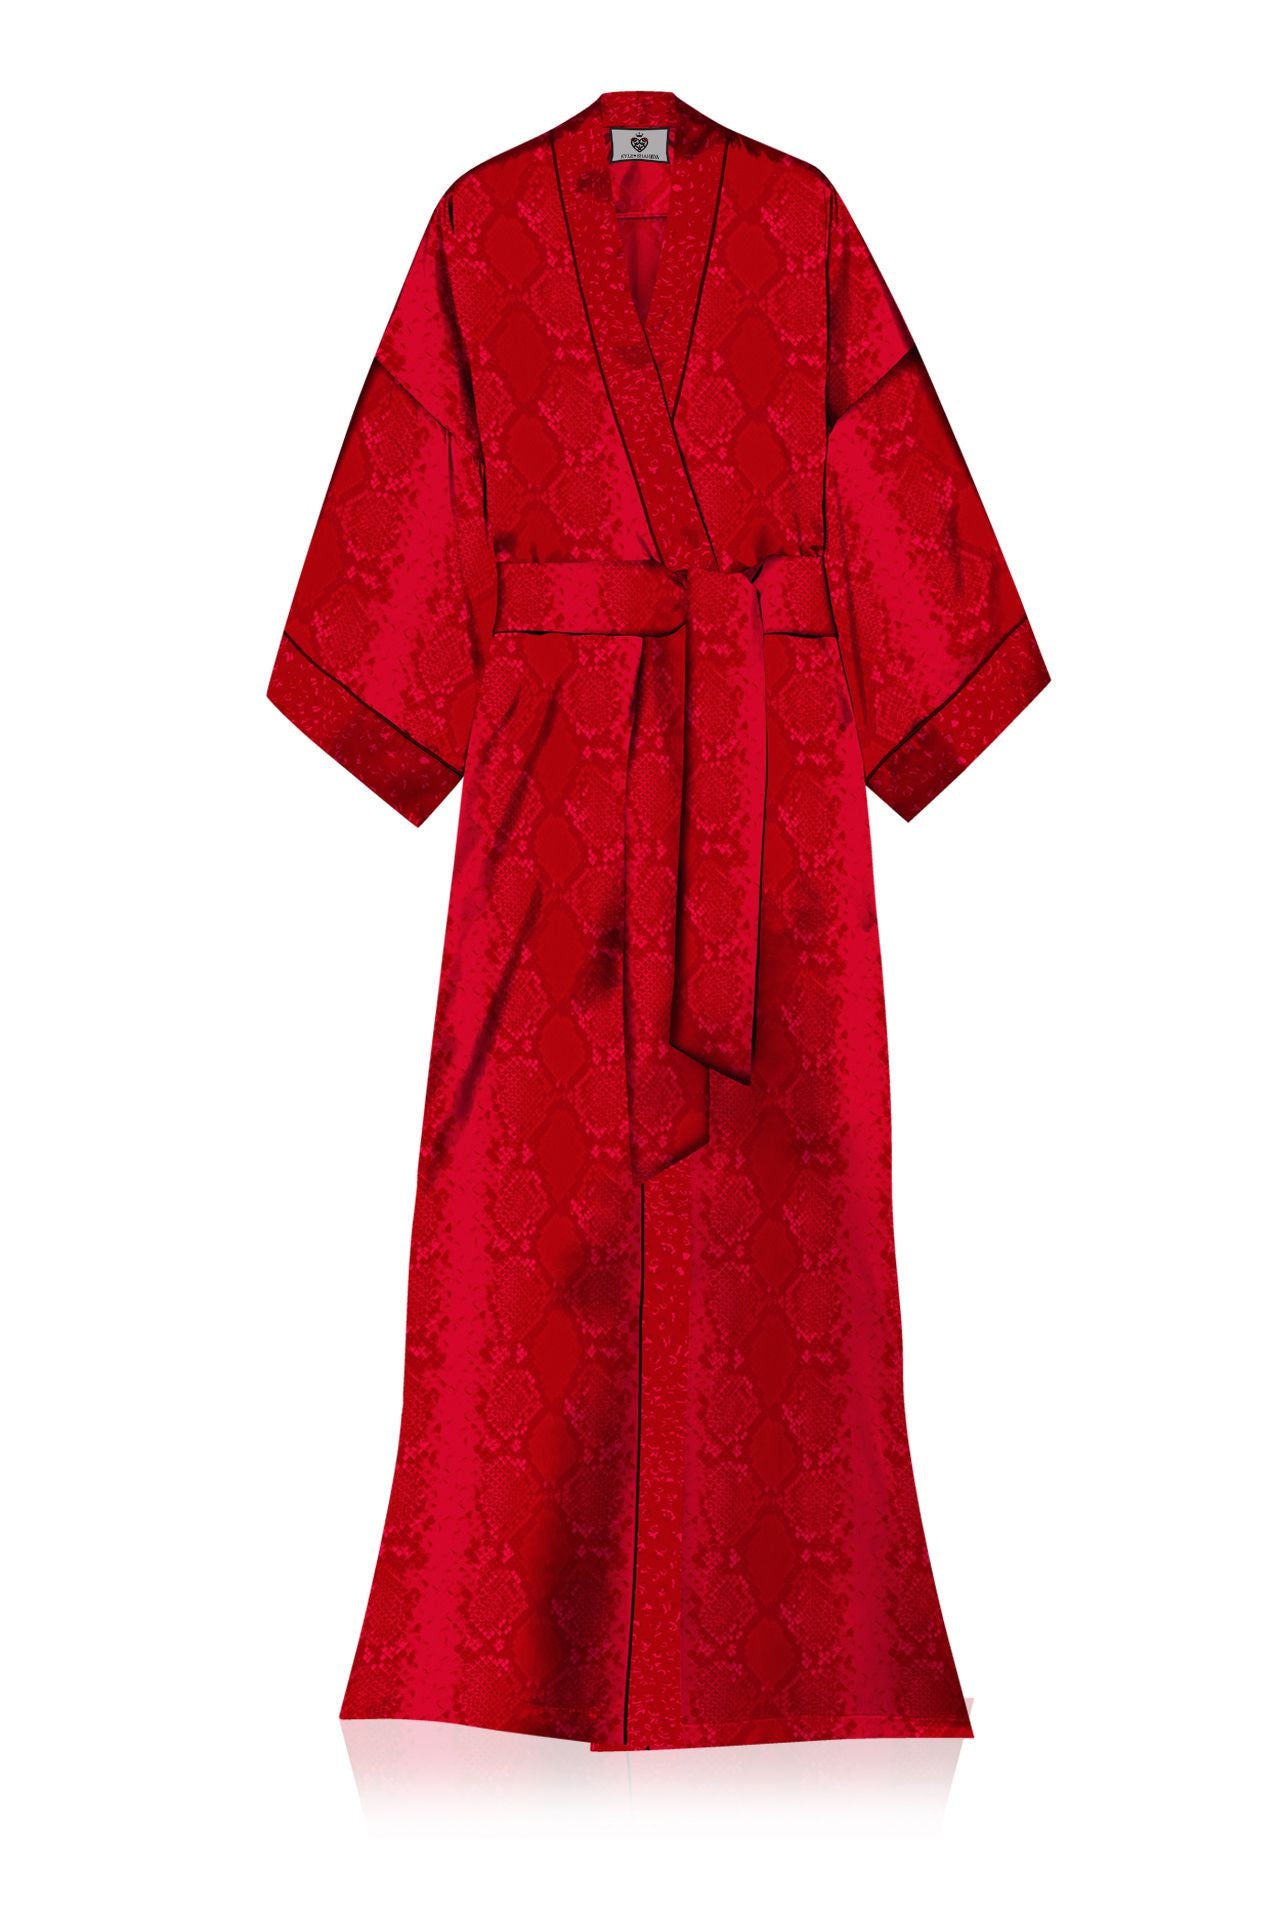 Made with Cupro Long Kimono Robe Dress in Blood Stone